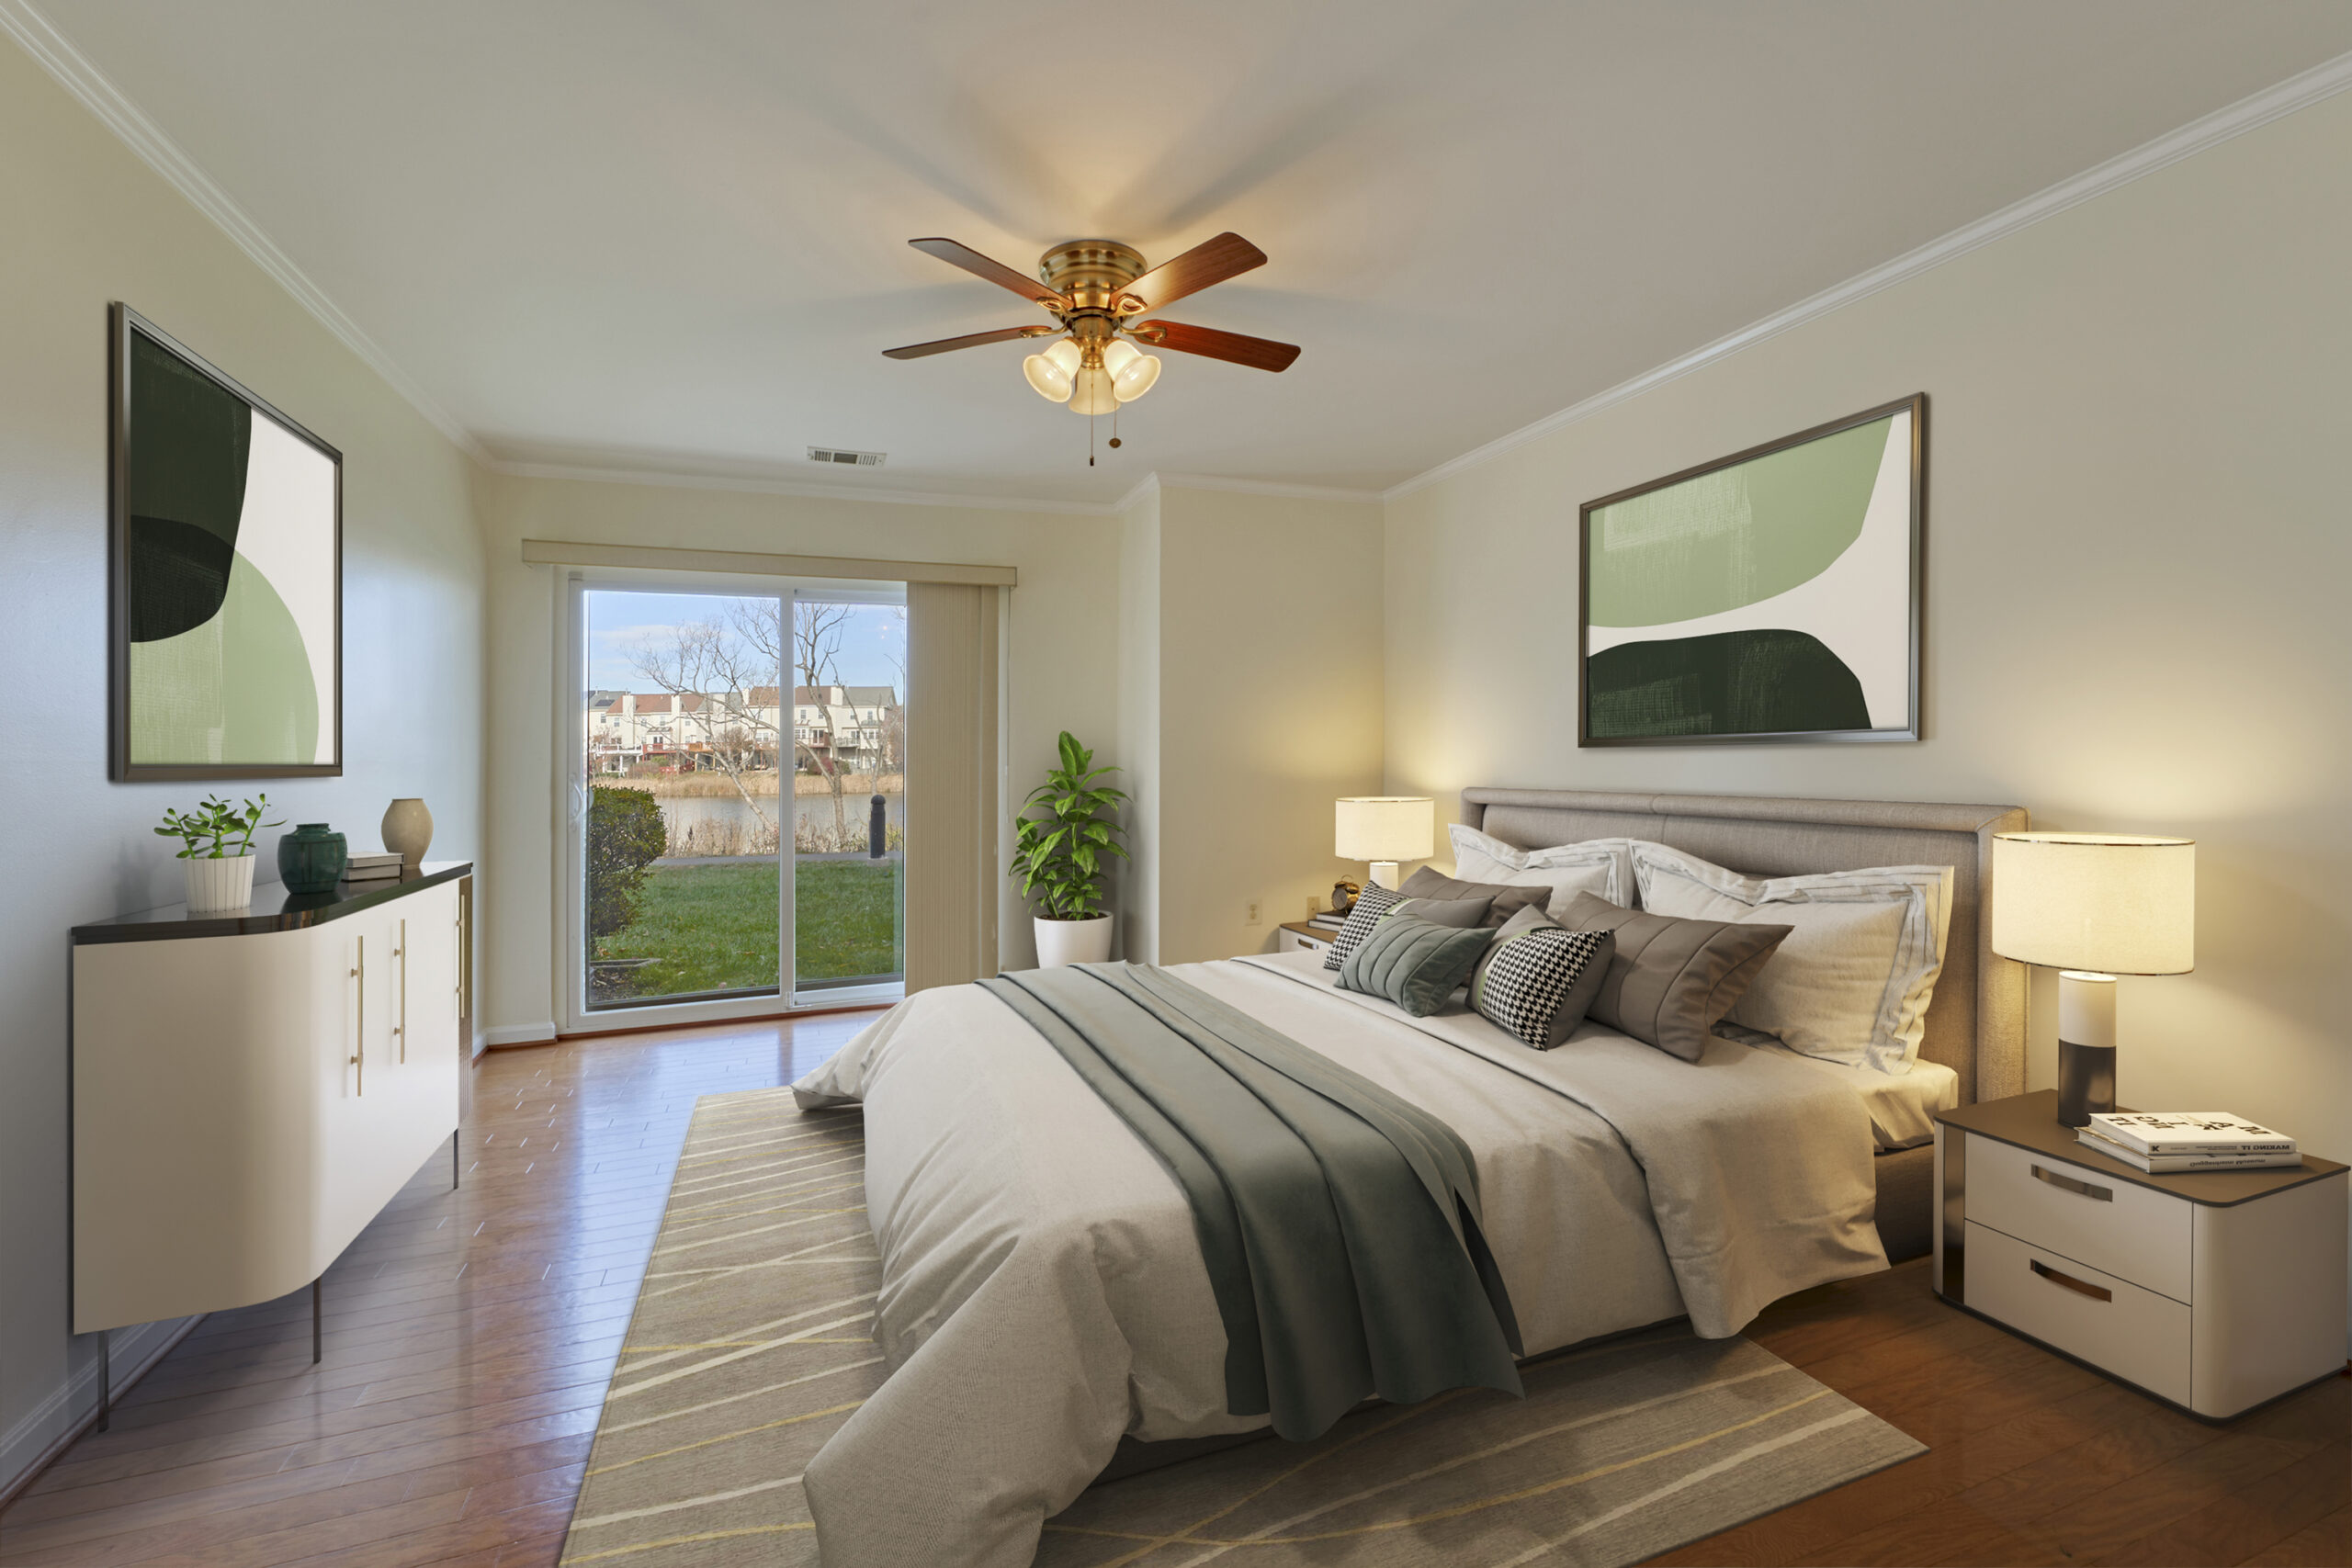 Professional interior photo of 20588 Cornstalk Ter Unit 101 - Showing the bedroom for one of the primary suites with hardwood floors, which has been virtually staged